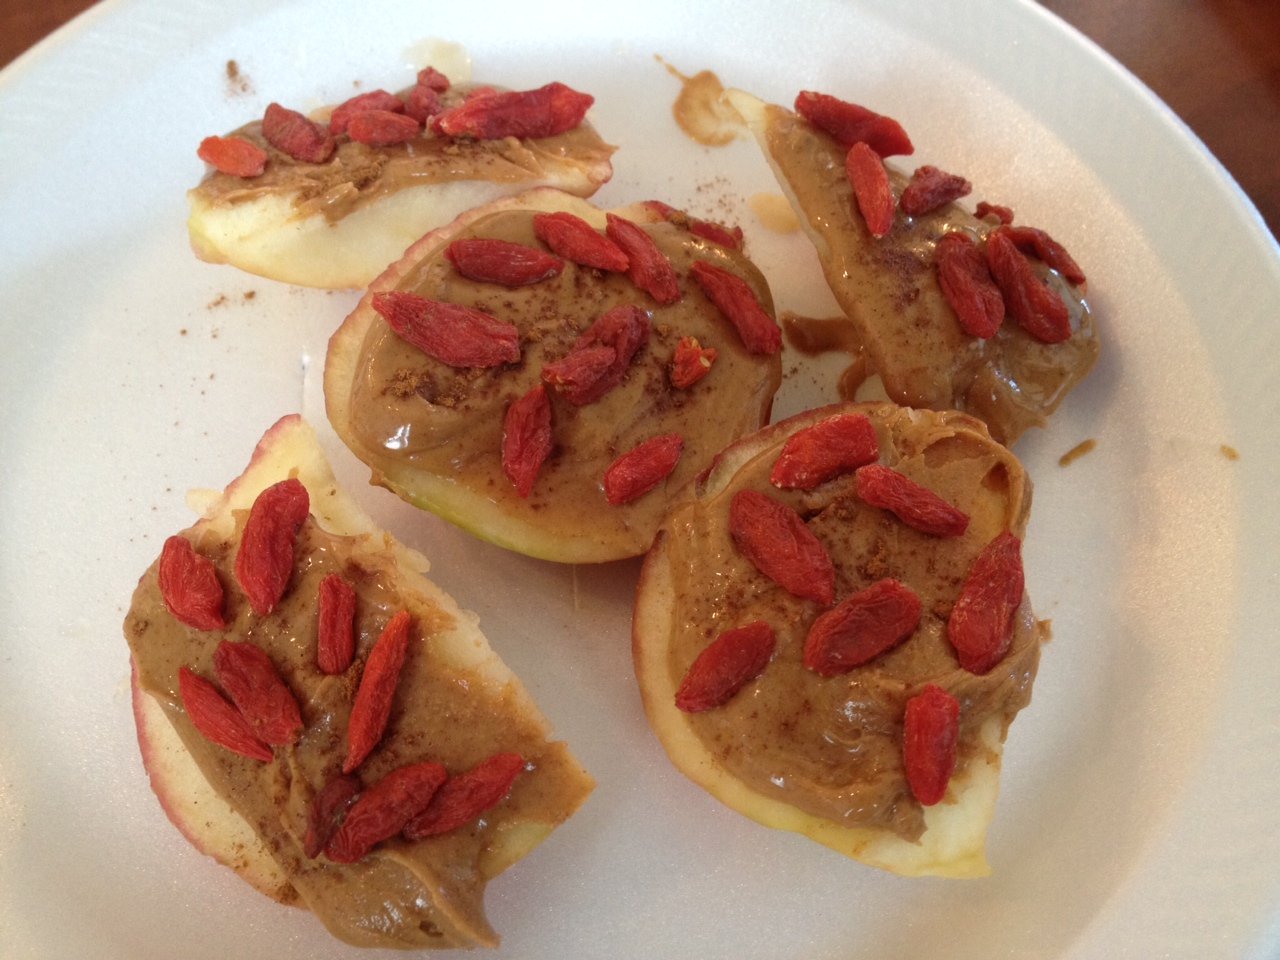 Goji Berry Snack with Apples and Peanut Butter